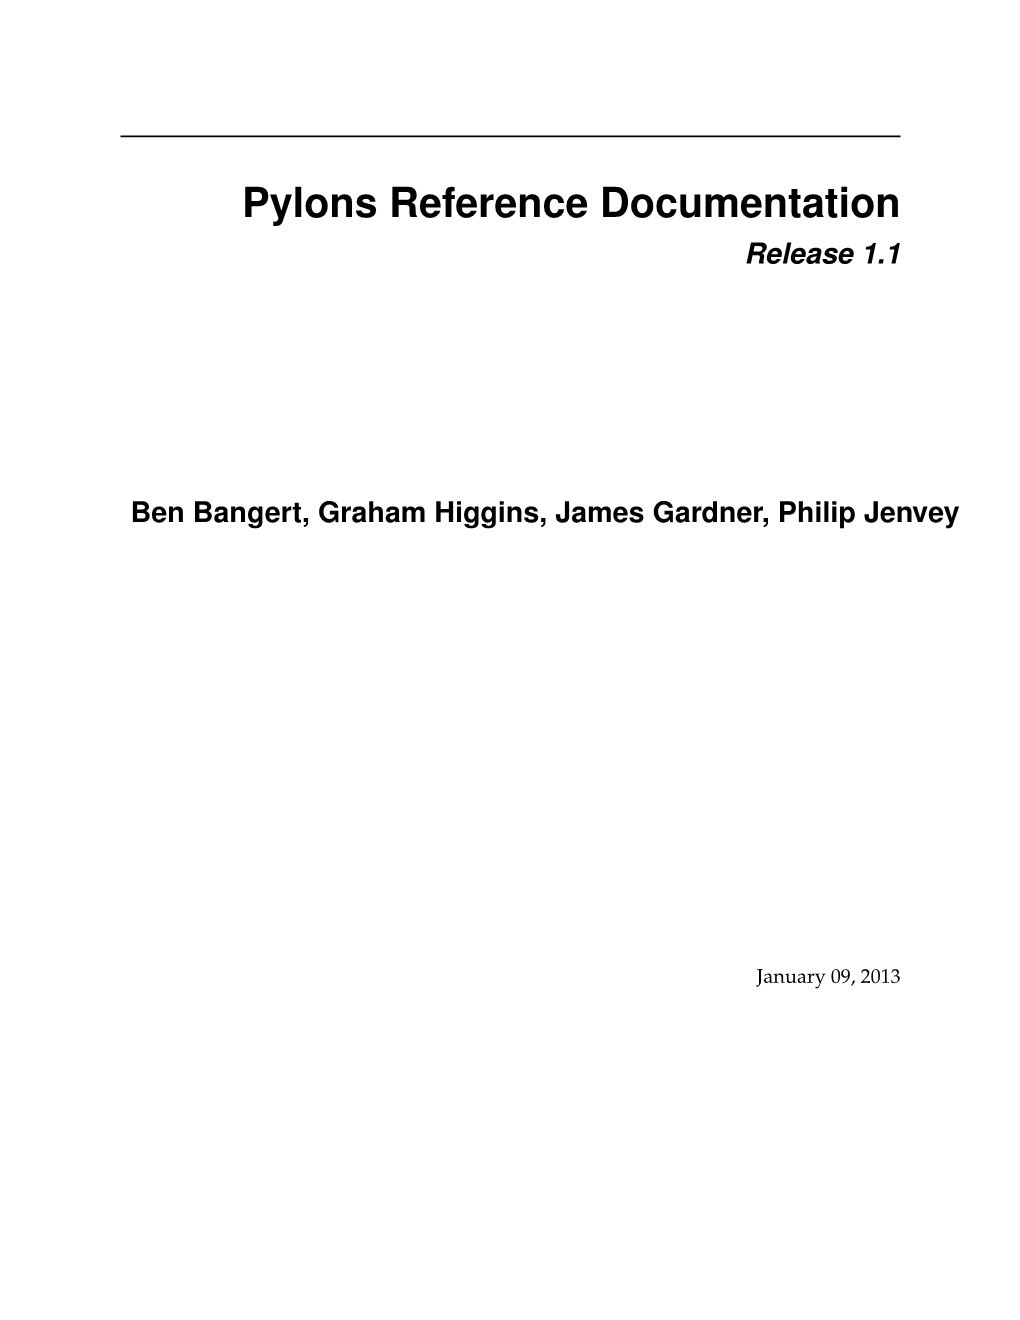 Pylons Reference Documentation Release 1.1